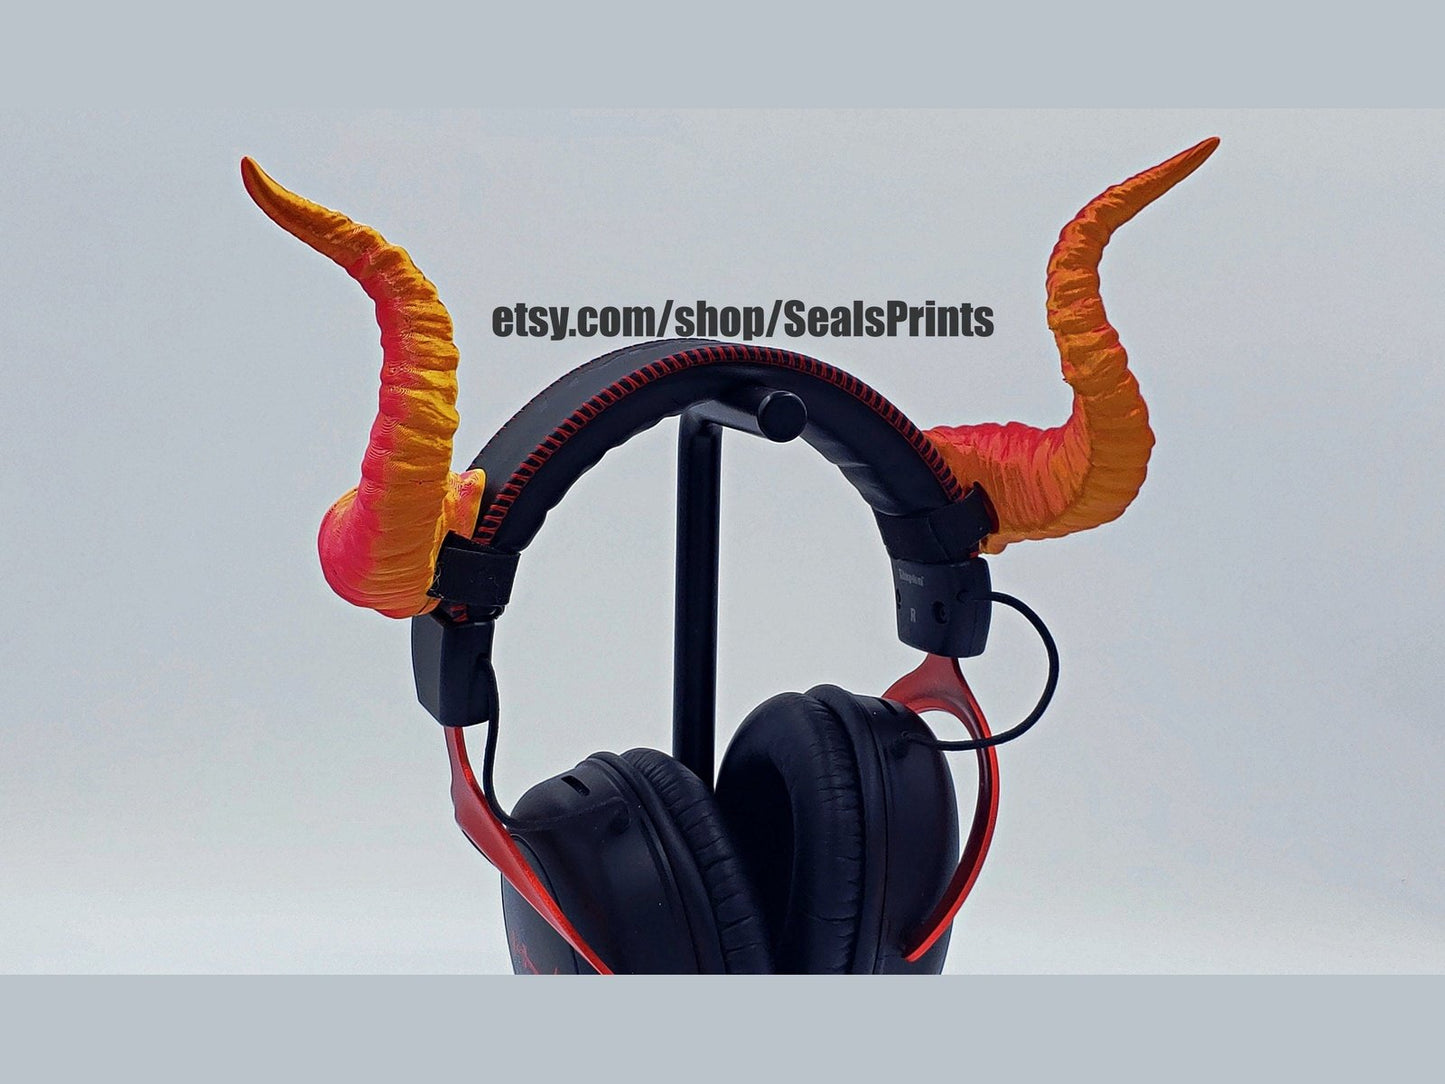 Curved Ram Horns Attachment for Headset, Gaming and Streaming Headset Accessories, cosplay, Streaming Prop, gaming streamer gift